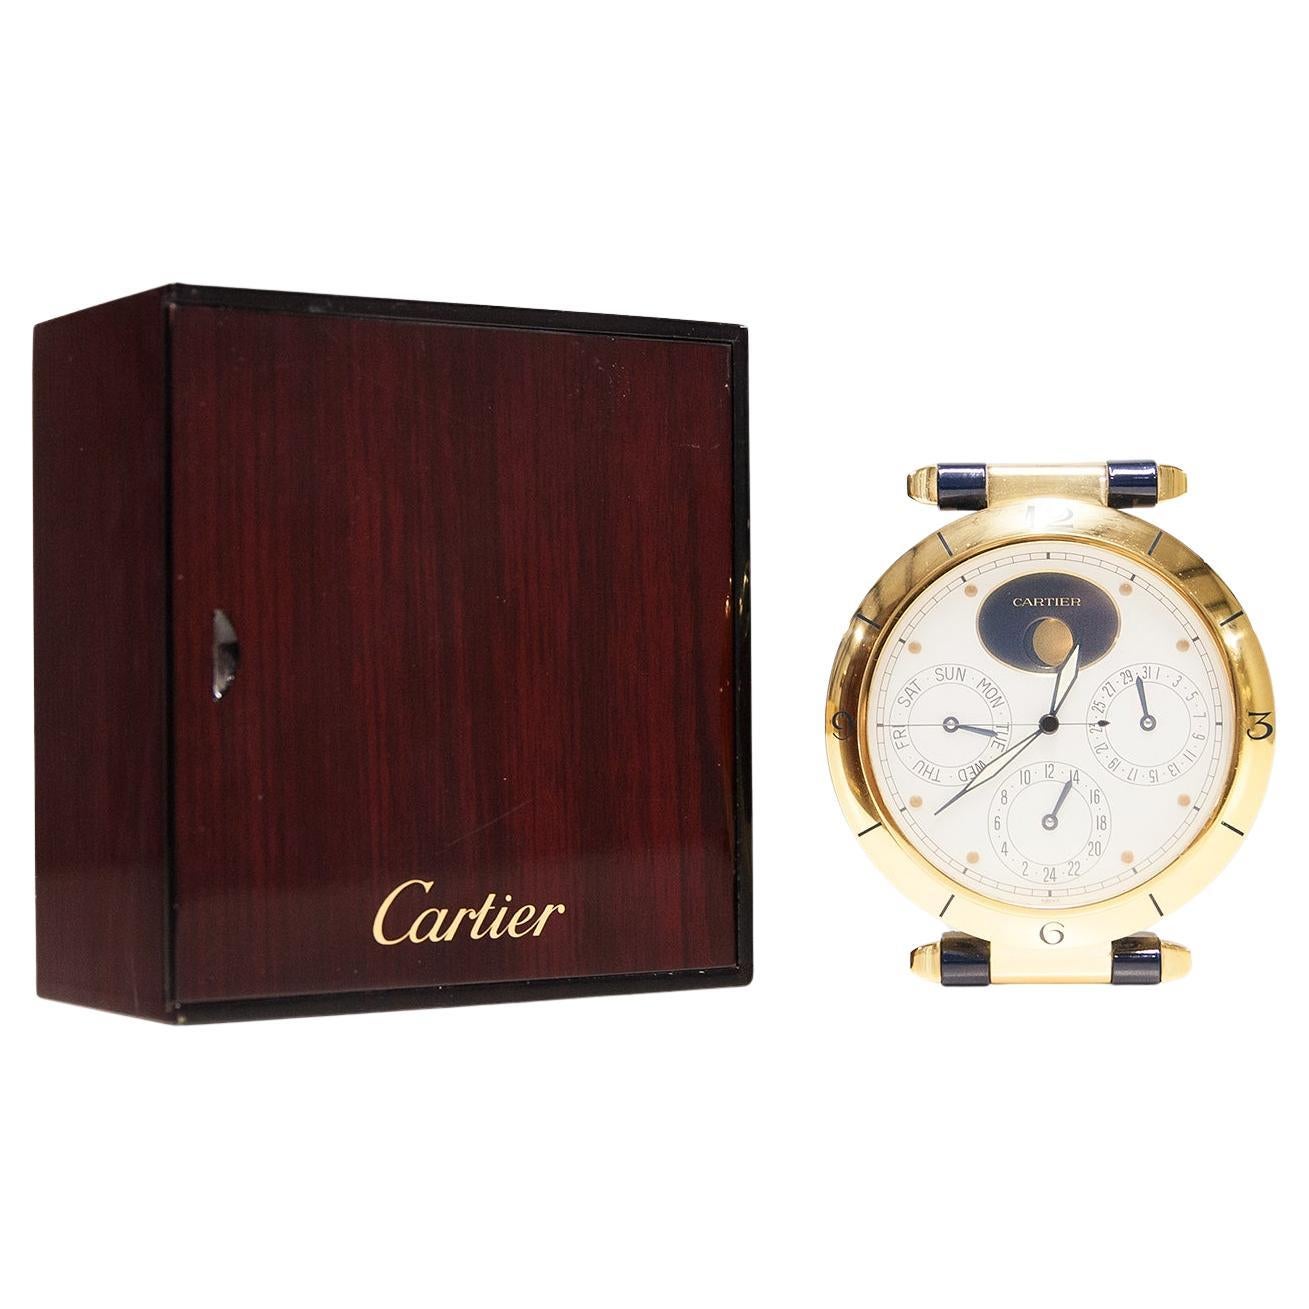 A CARTIER 'PASHA' DUAL TIME ZONE CALENDAR DESK CLOCK WITH MOON PHASE, CIRCA 1995 jewelled quartz movement, frosted silver signed dial with subsidiary dials for the day, date and second time zone below the midnight-blue oval aperture for the moon